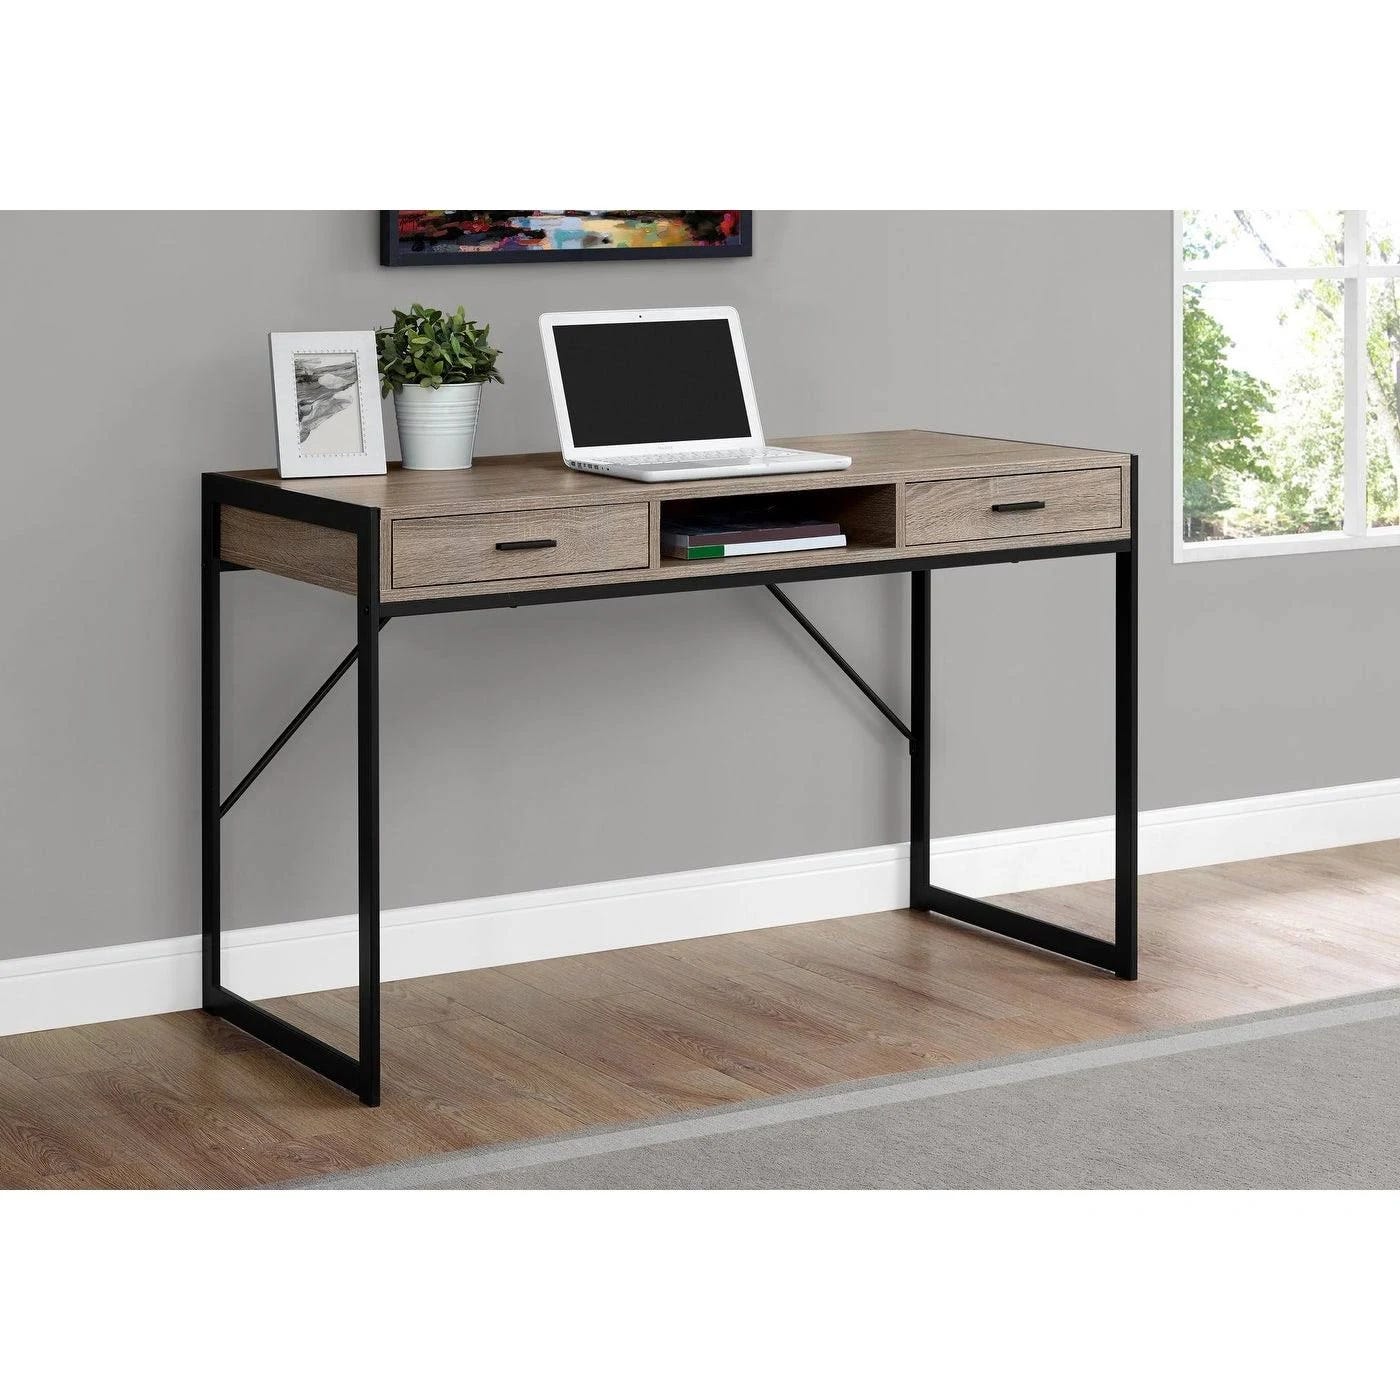 Monarch Black Metal Desk with Drawers (48